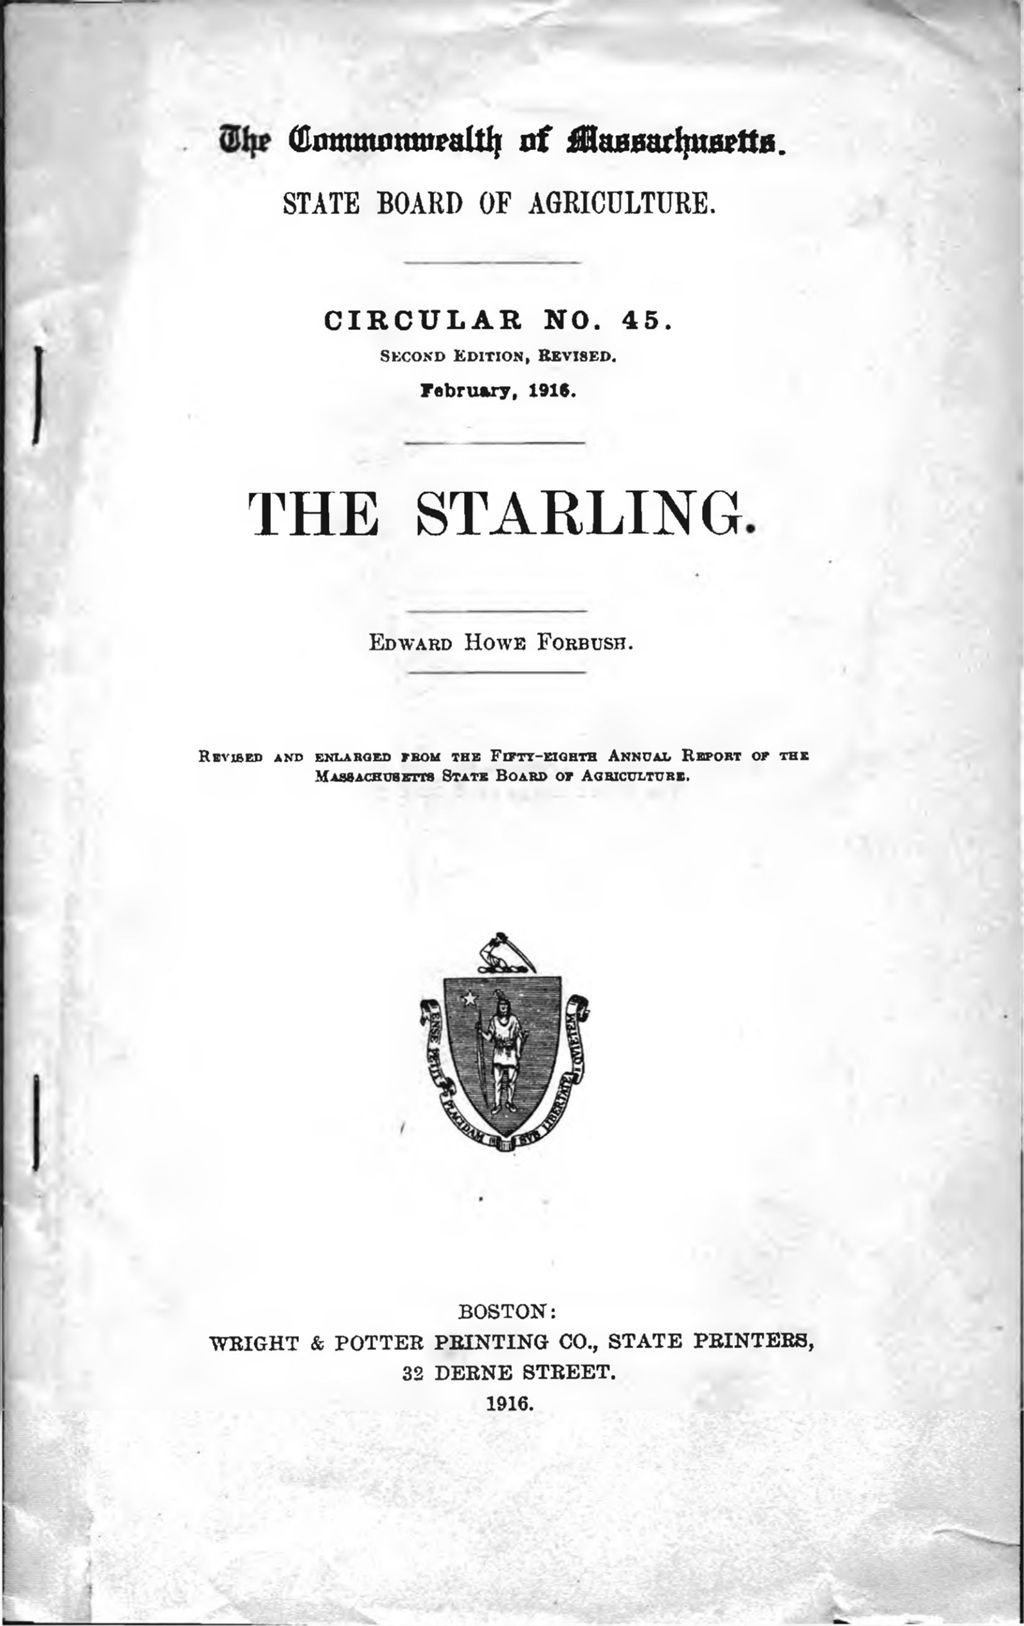 Massachusetts State Board of Agriculture Circular no. 45. The Starling, 1916